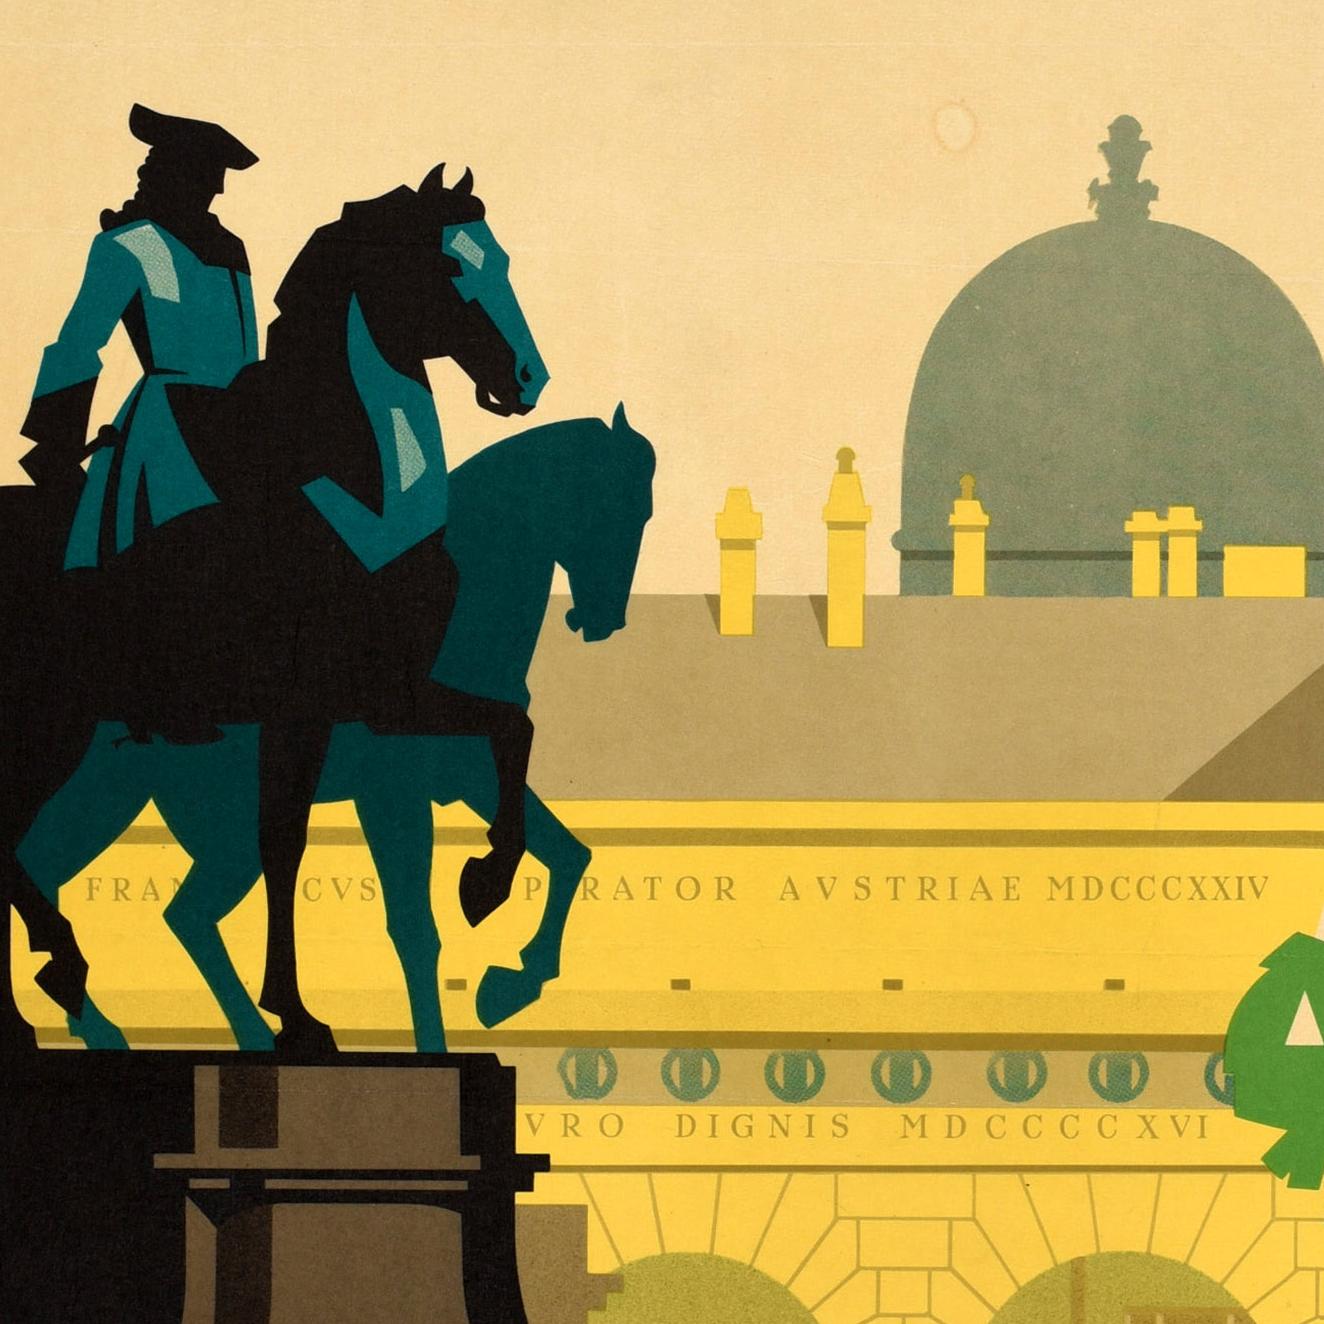 Original vintage travel poster for Vienna Austria featuring a stunning Art Deco design by the Austrian artist Hermann Kosel (1896-1983) depicting one of the equestrian statues on the historical monument of Empress Maria Theresia (unveiled 1888) of a